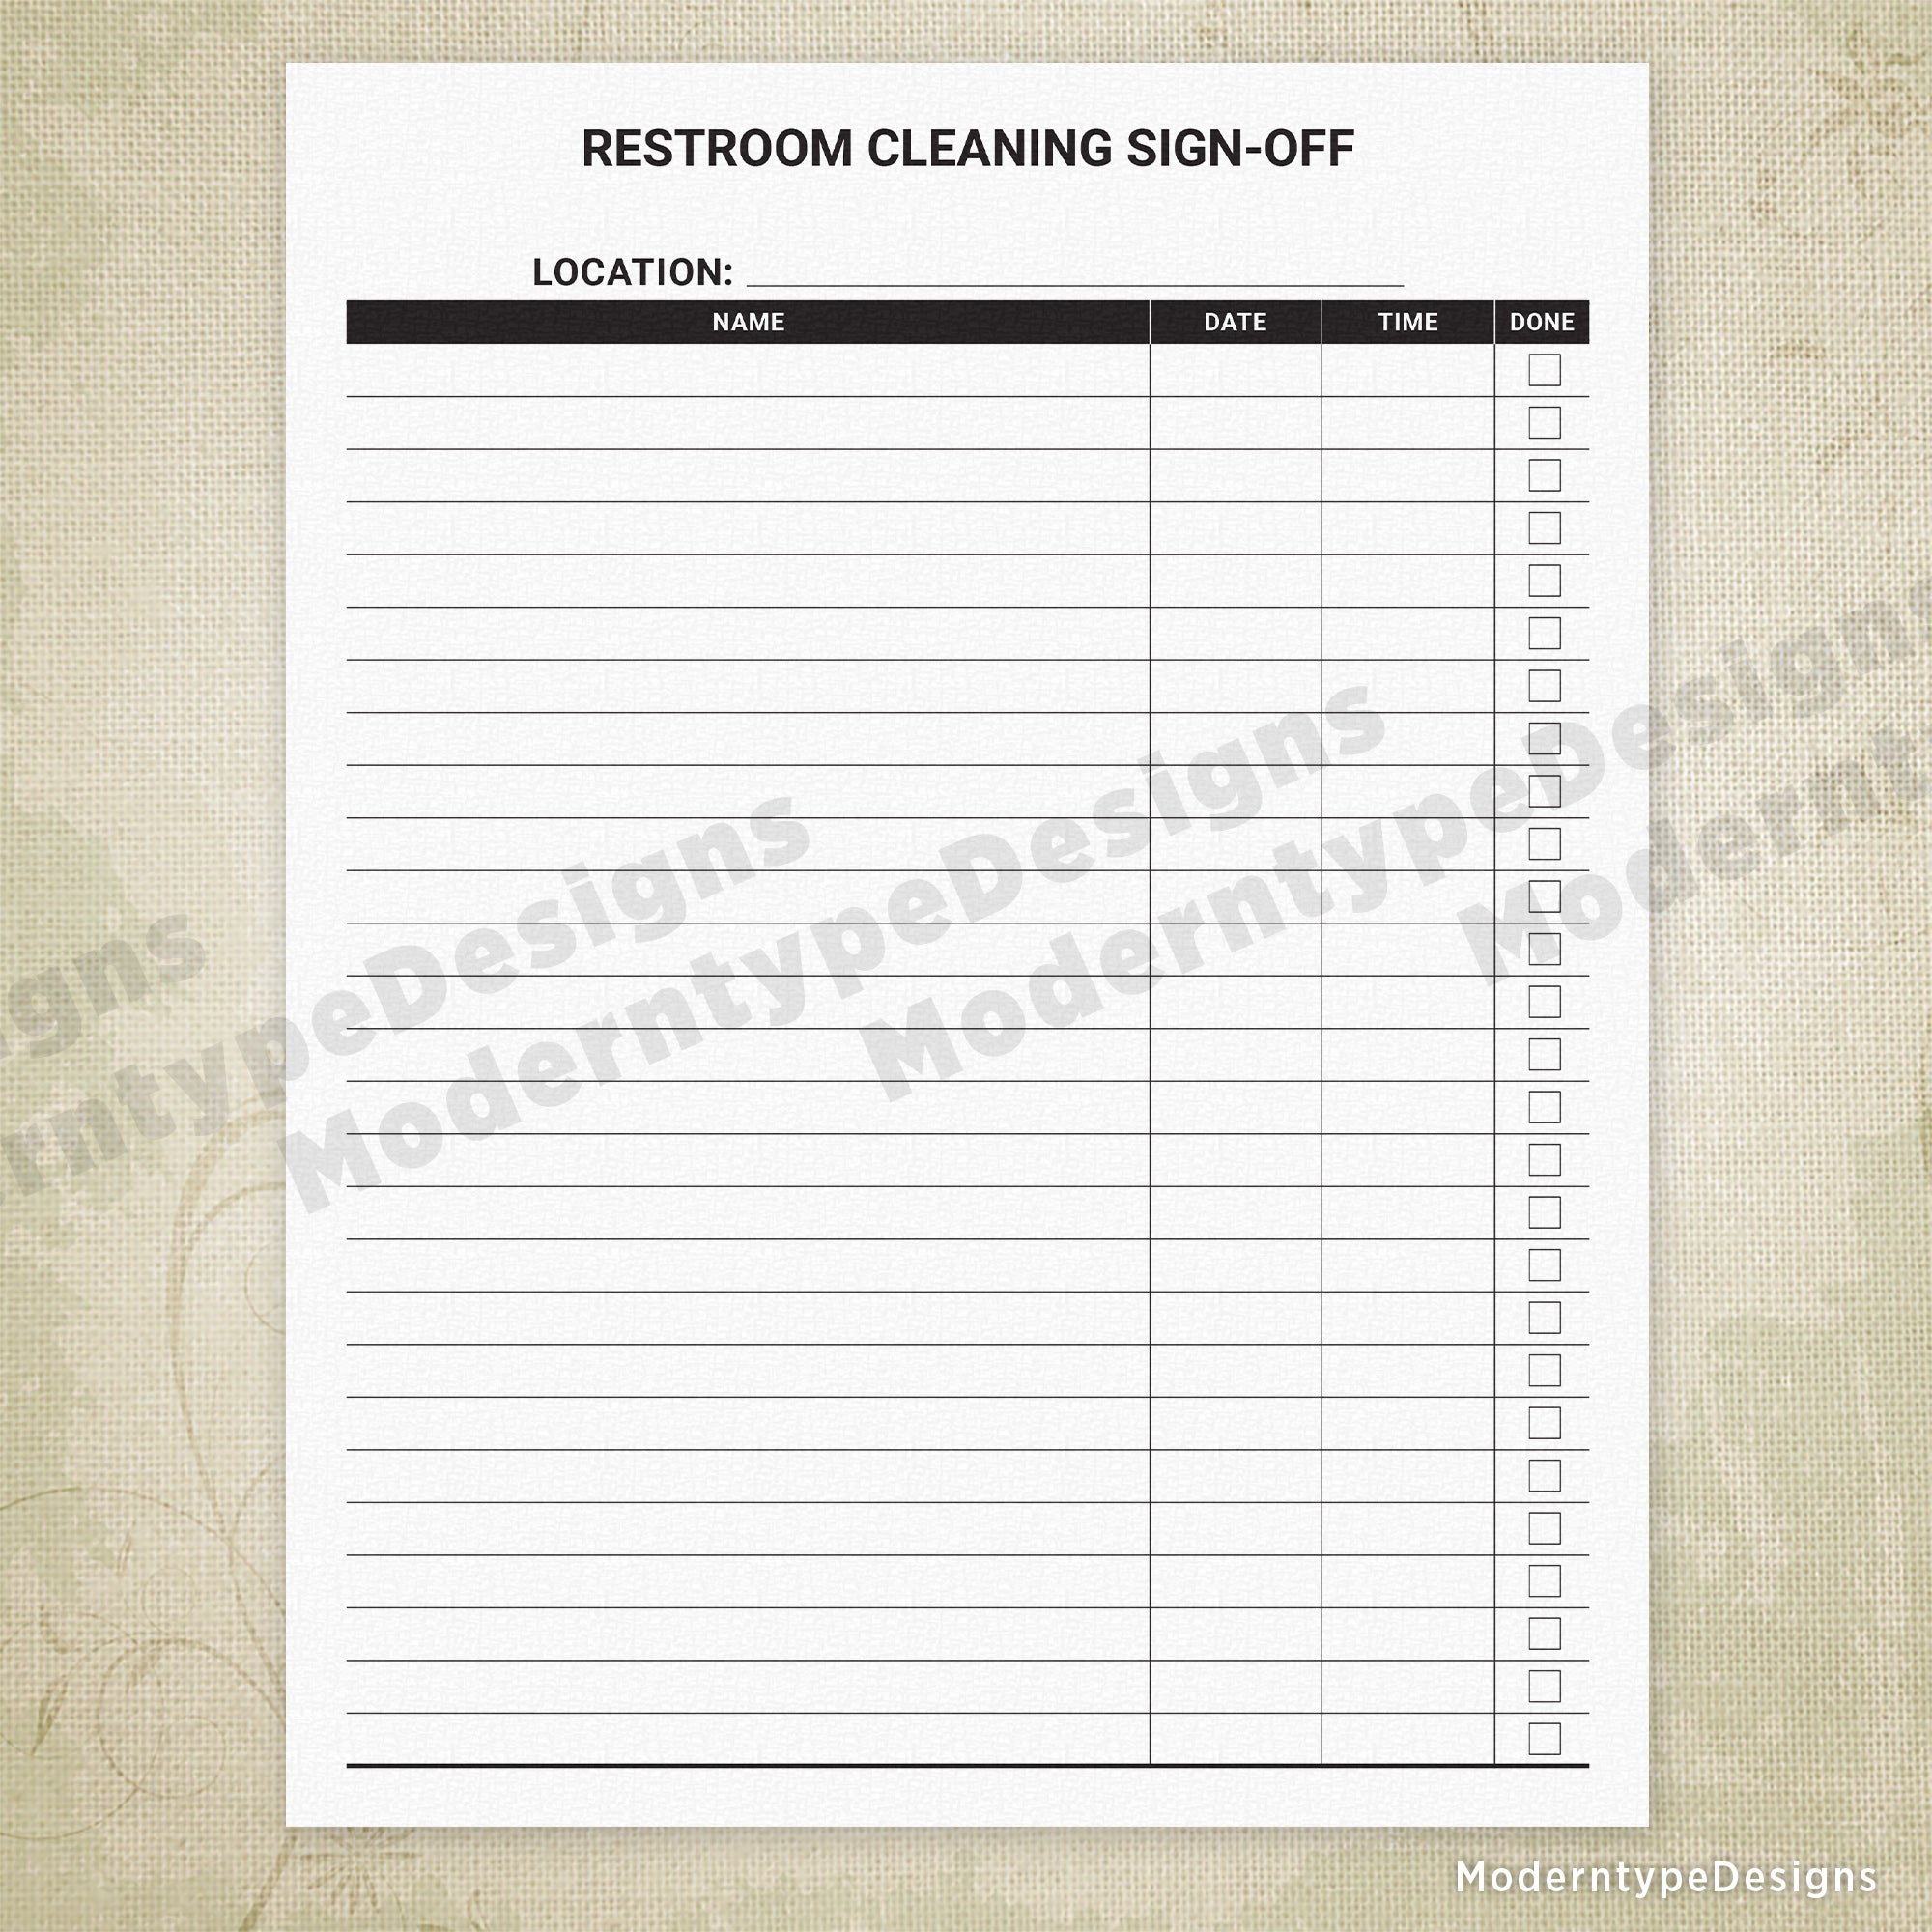 Restroom Cleaning Sign-off Sheet Printable